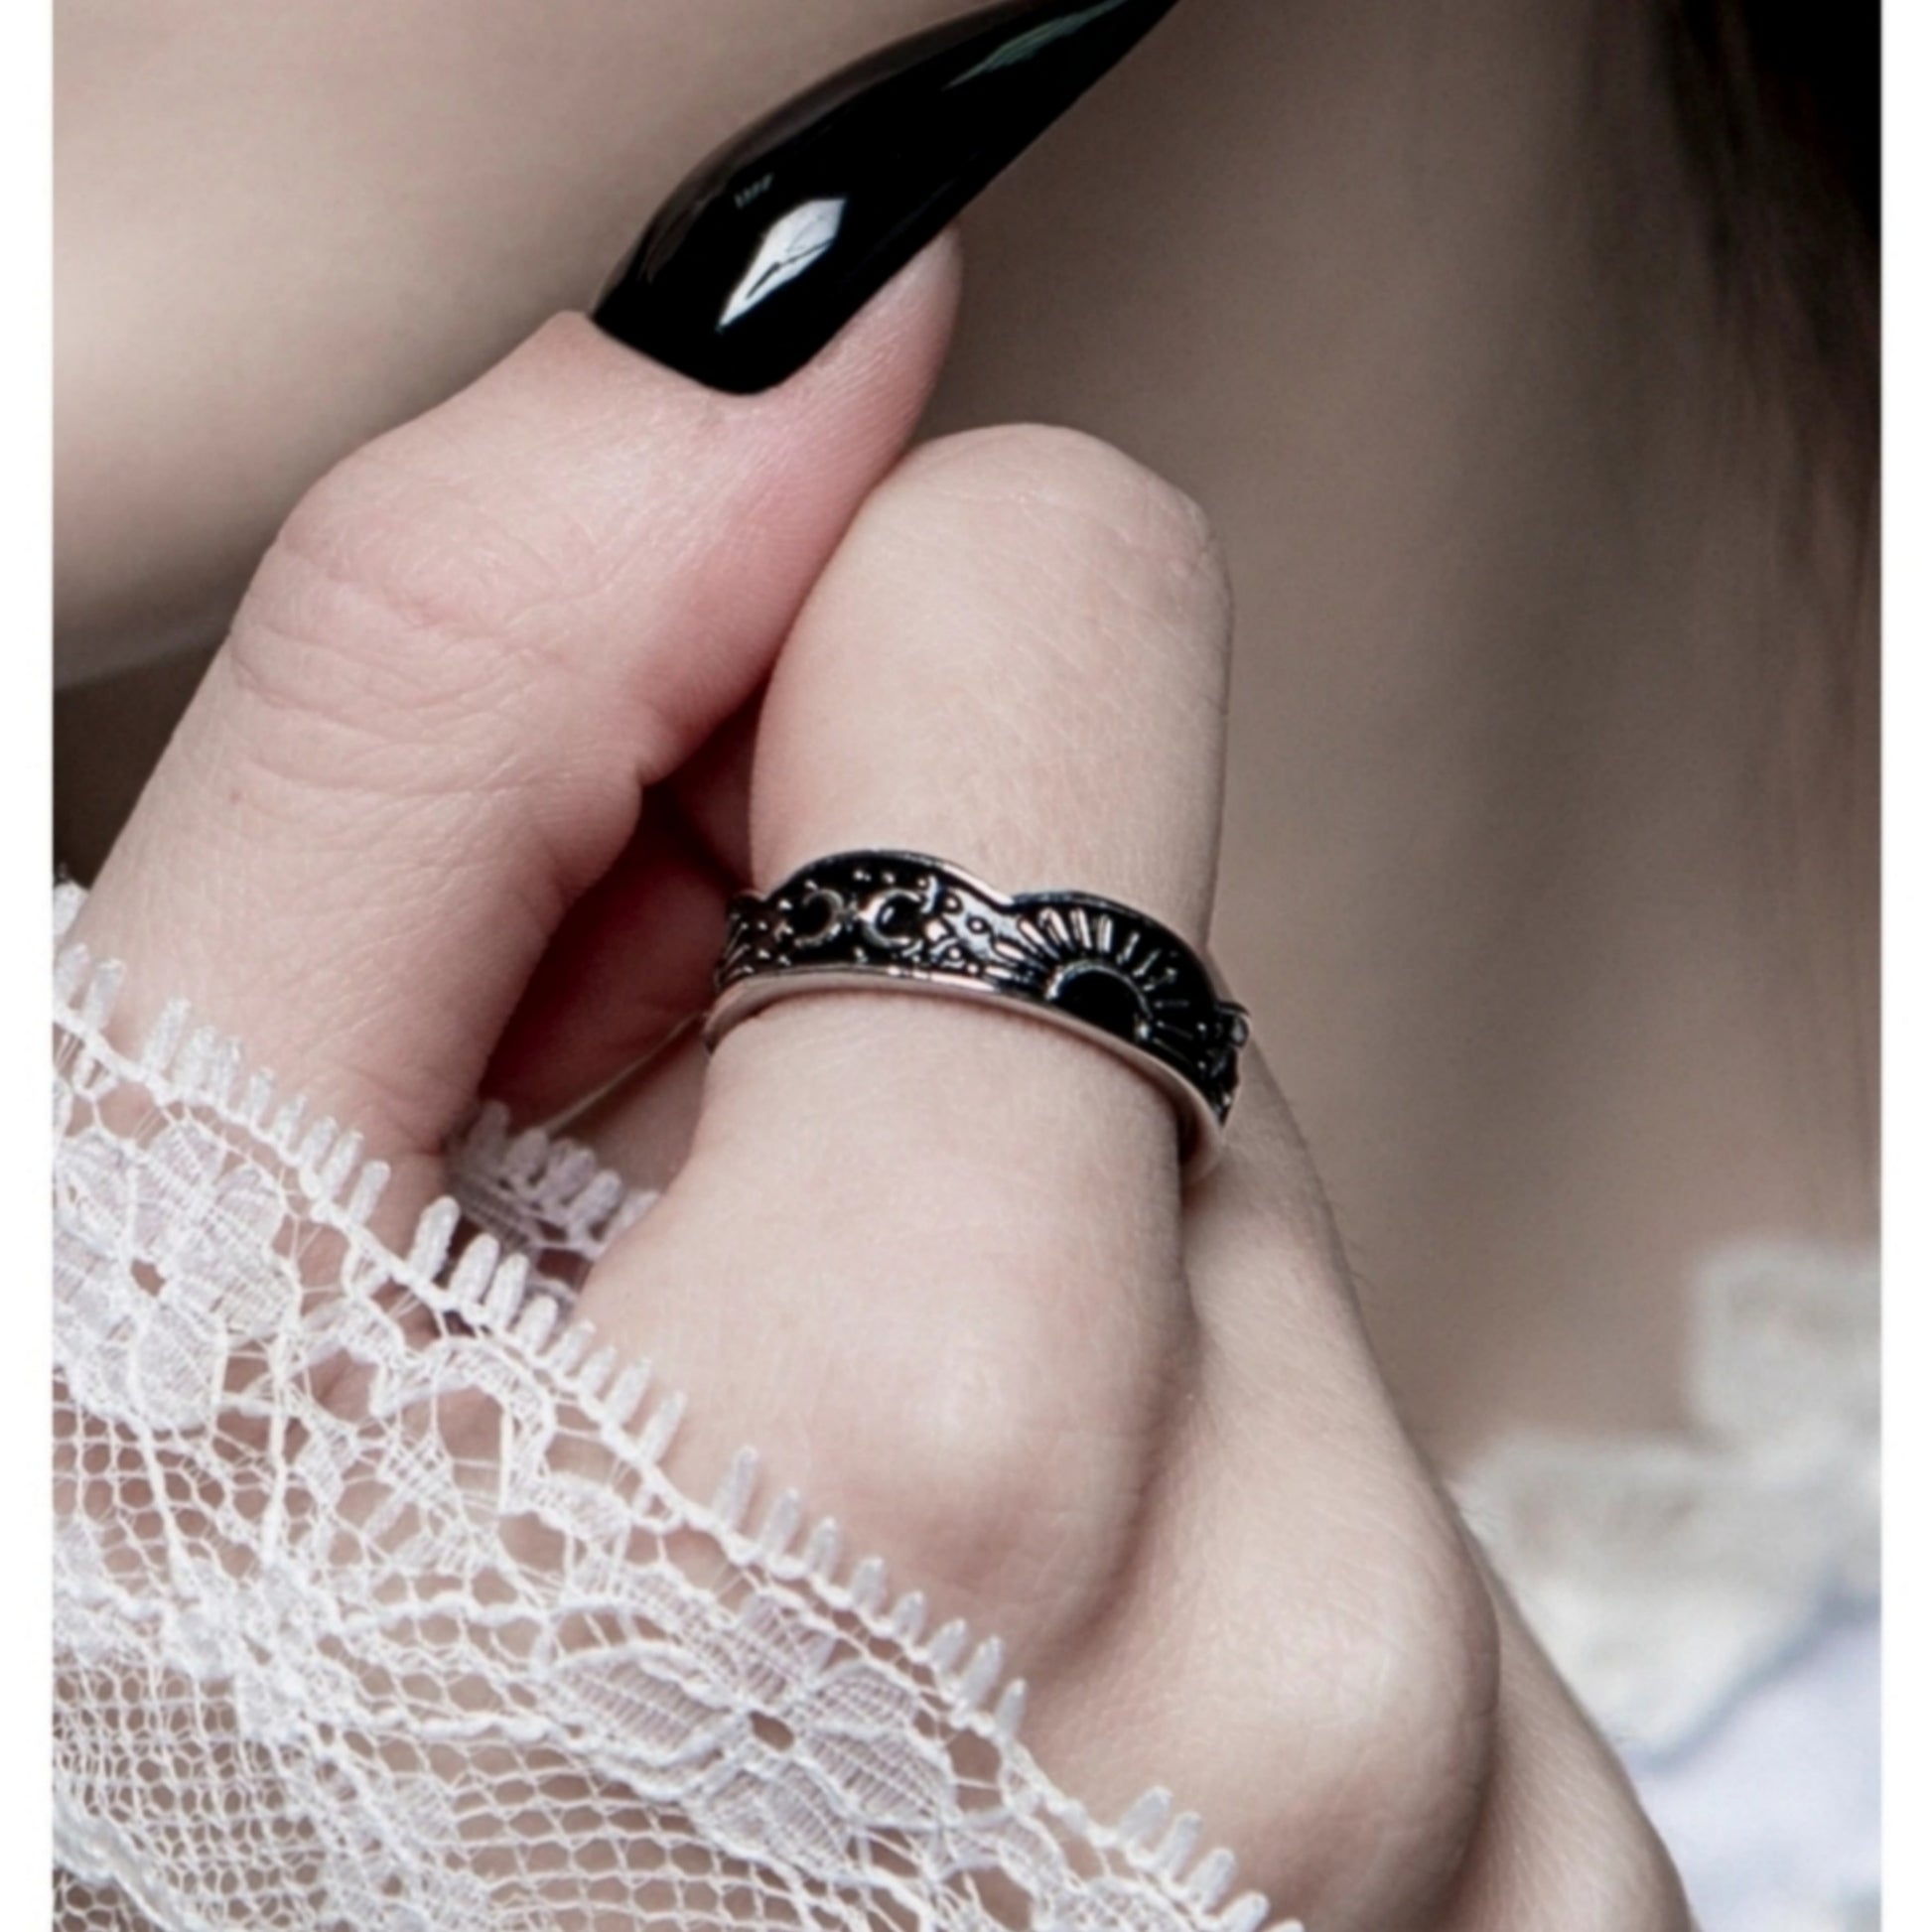 Victorian Ring | Antique "Shine Bright" Inscribed Silver Black - Rogue + Wolf - Rings